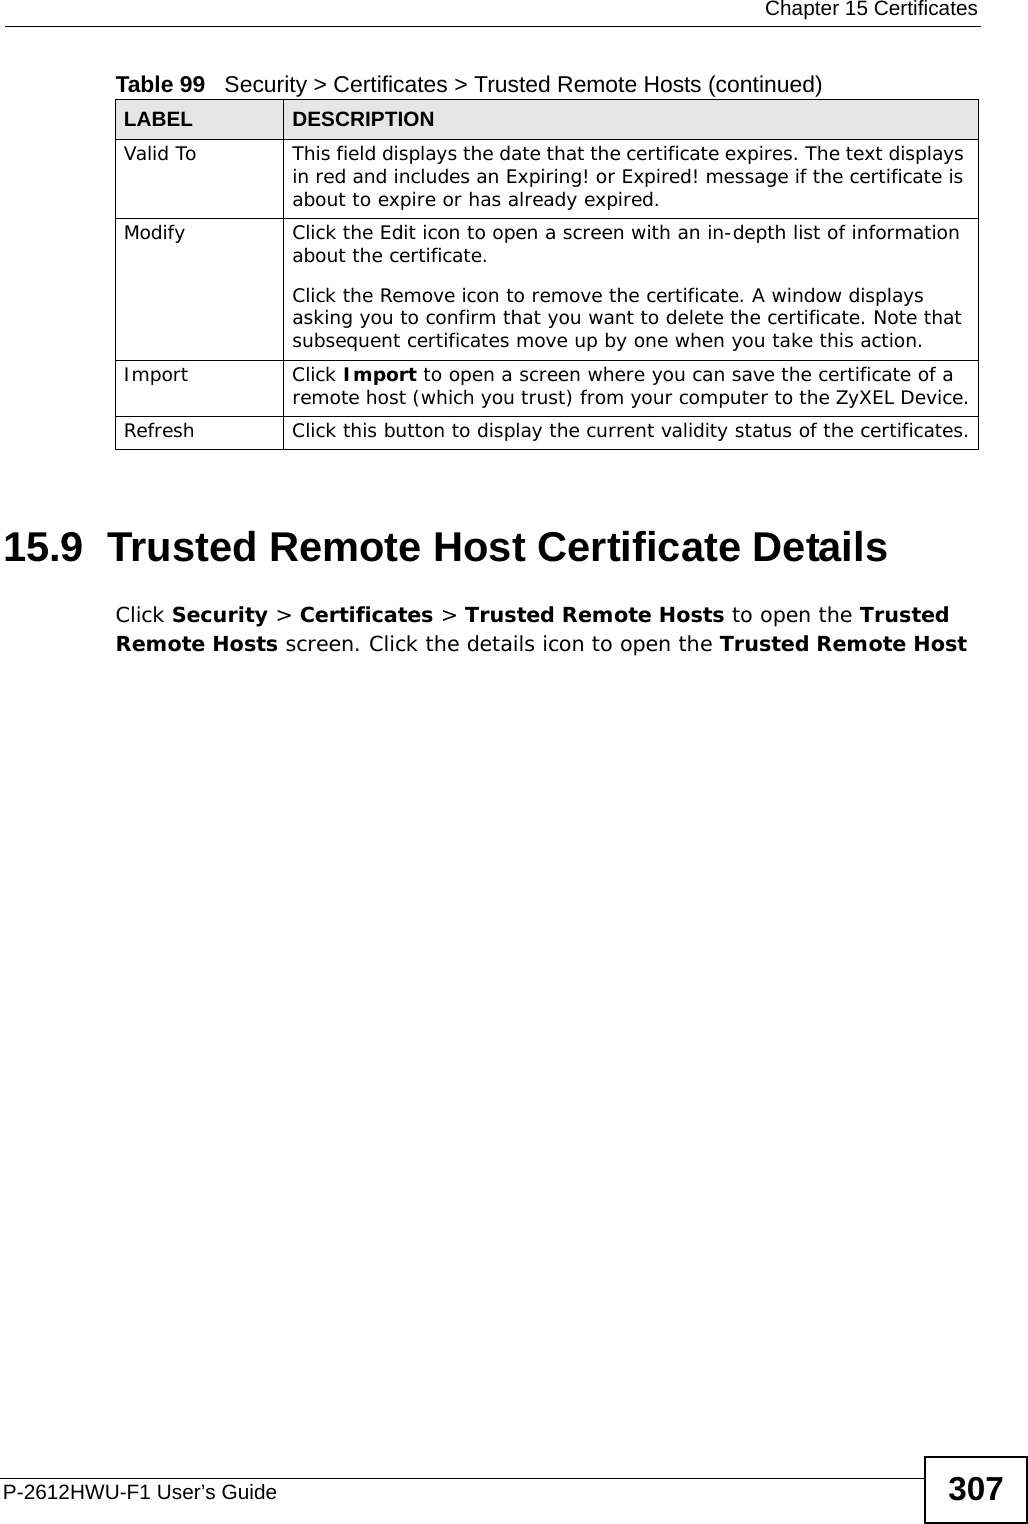  Chapter 15 CertificatesP-2612HWU-F1 User’s Guide 30715.9  Trusted Remote Host Certificate Details   Click Security &gt; Certificates &gt; Trusted Remote Hosts to open the Trusted Remote Hosts screen. Click the details icon to open the Trusted Remote Host Valid To This field displays the date that the certificate expires. The text displays in red and includes an Expiring! or Expired! message if the certificate is about to expire or has already expired.Modify Click the Edit icon to open a screen with an in-depth list of information about the certificate.Click the Remove icon to remove the certificate. A window displays asking you to confirm that you want to delete the certificate. Note that subsequent certificates move up by one when you take this action.Import Click Import to open a screen where you can save the certificate of a remote host (which you trust) from your computer to the ZyXEL Device.Refresh Click this button to display the current validity status of the certificates.Table 99   Security &gt; Certificates &gt; Trusted Remote Hosts (continued)LABEL DESCRIPTION